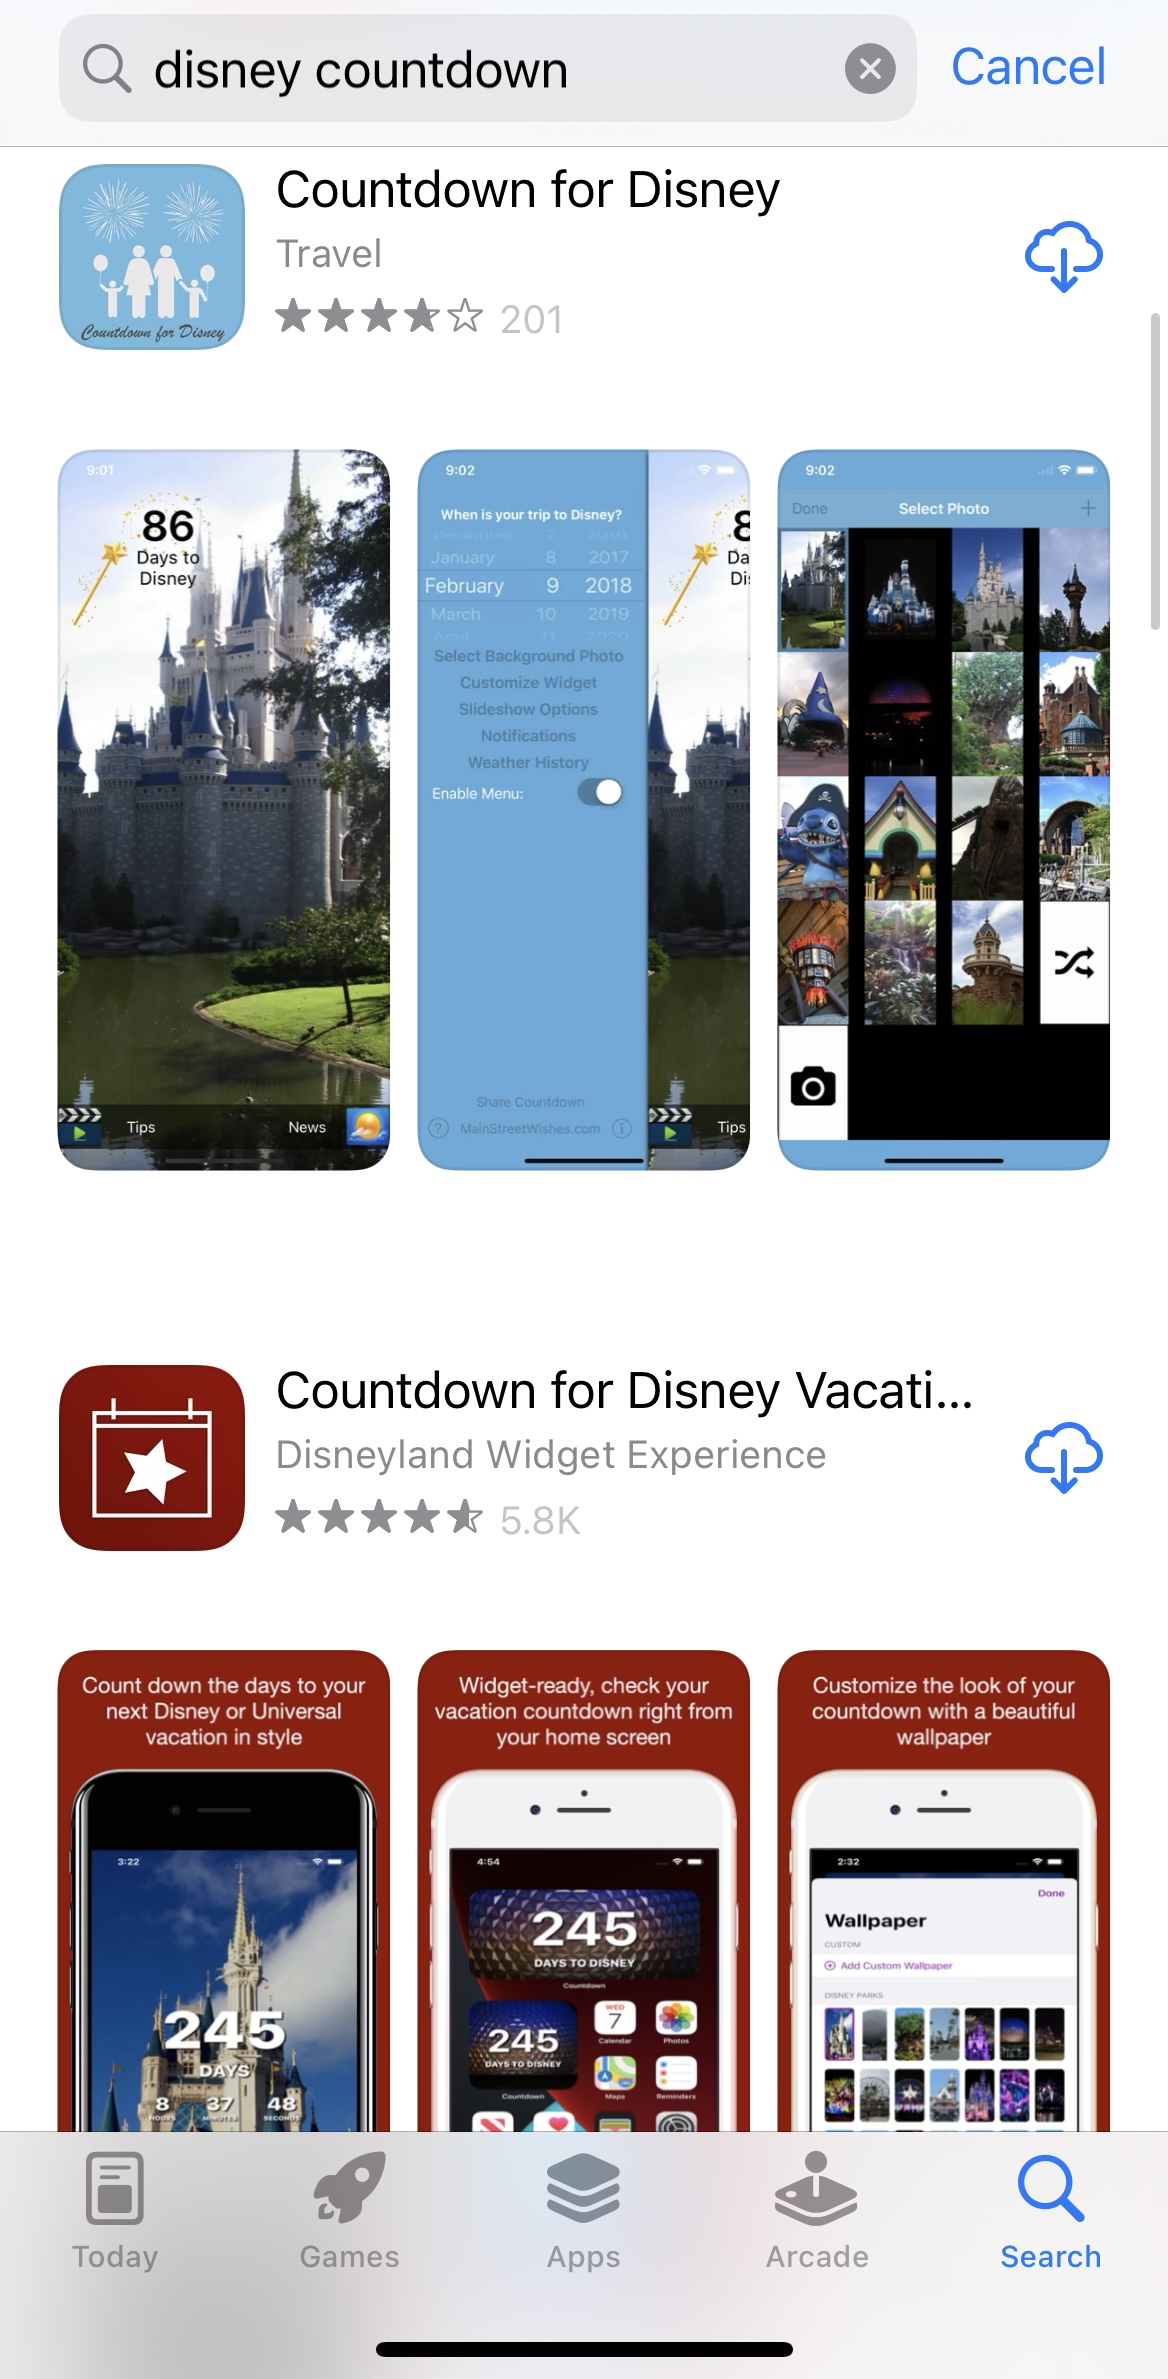 Is There A Disney Countdown App